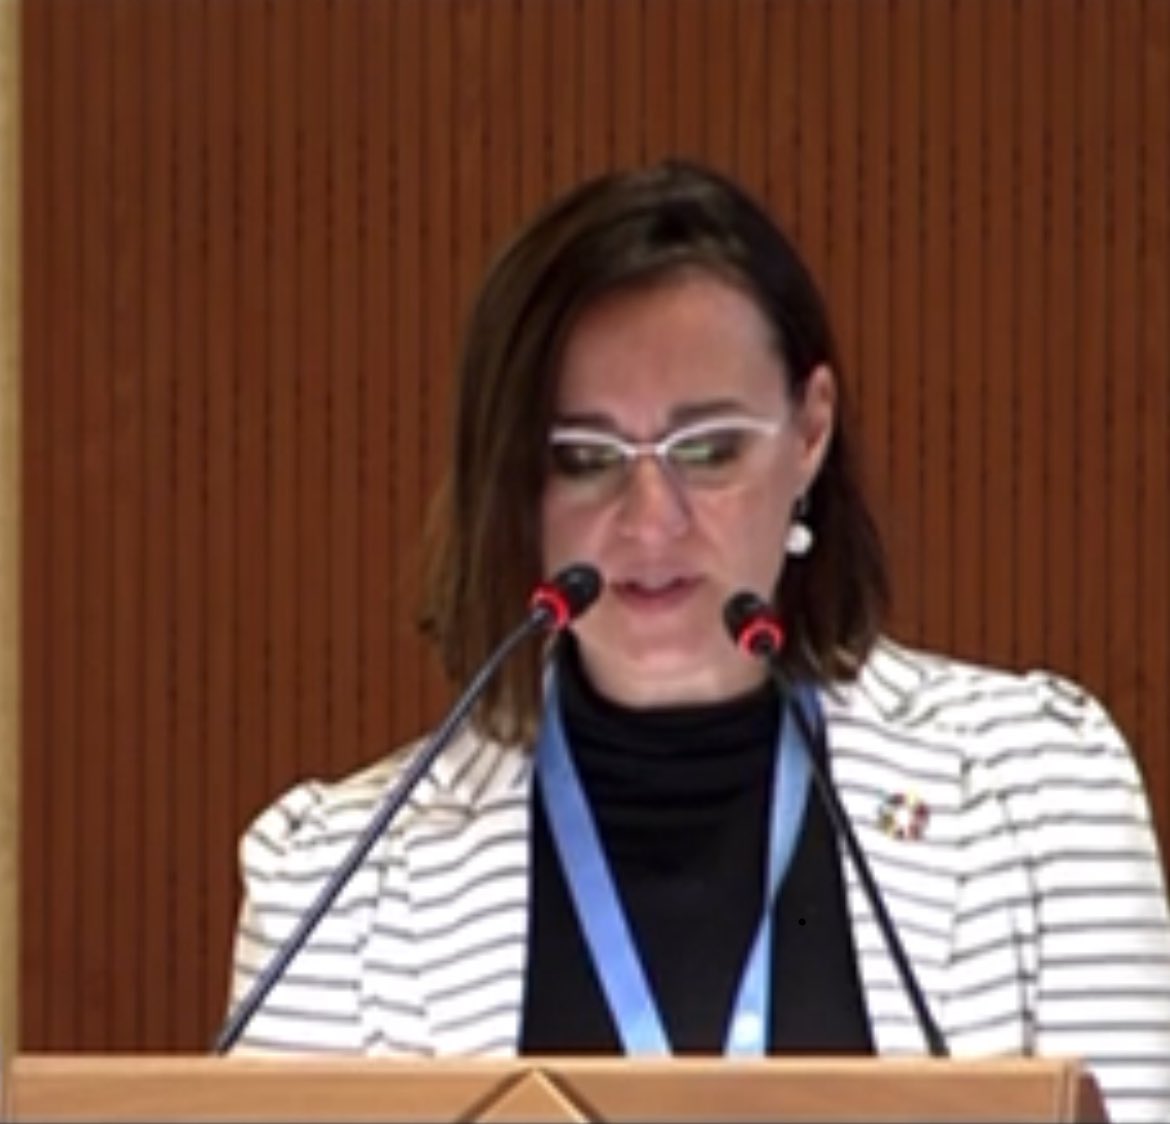 At #WHA77 @UNDP congratulates @WHO on an ambitious #GPW14 & looks forward an even stronger partnership with WHO on its implementation, especially for ending the epidemics of AIDS, TB & malaria, climate & health, AMR, UHC, pandemic risk & digital health